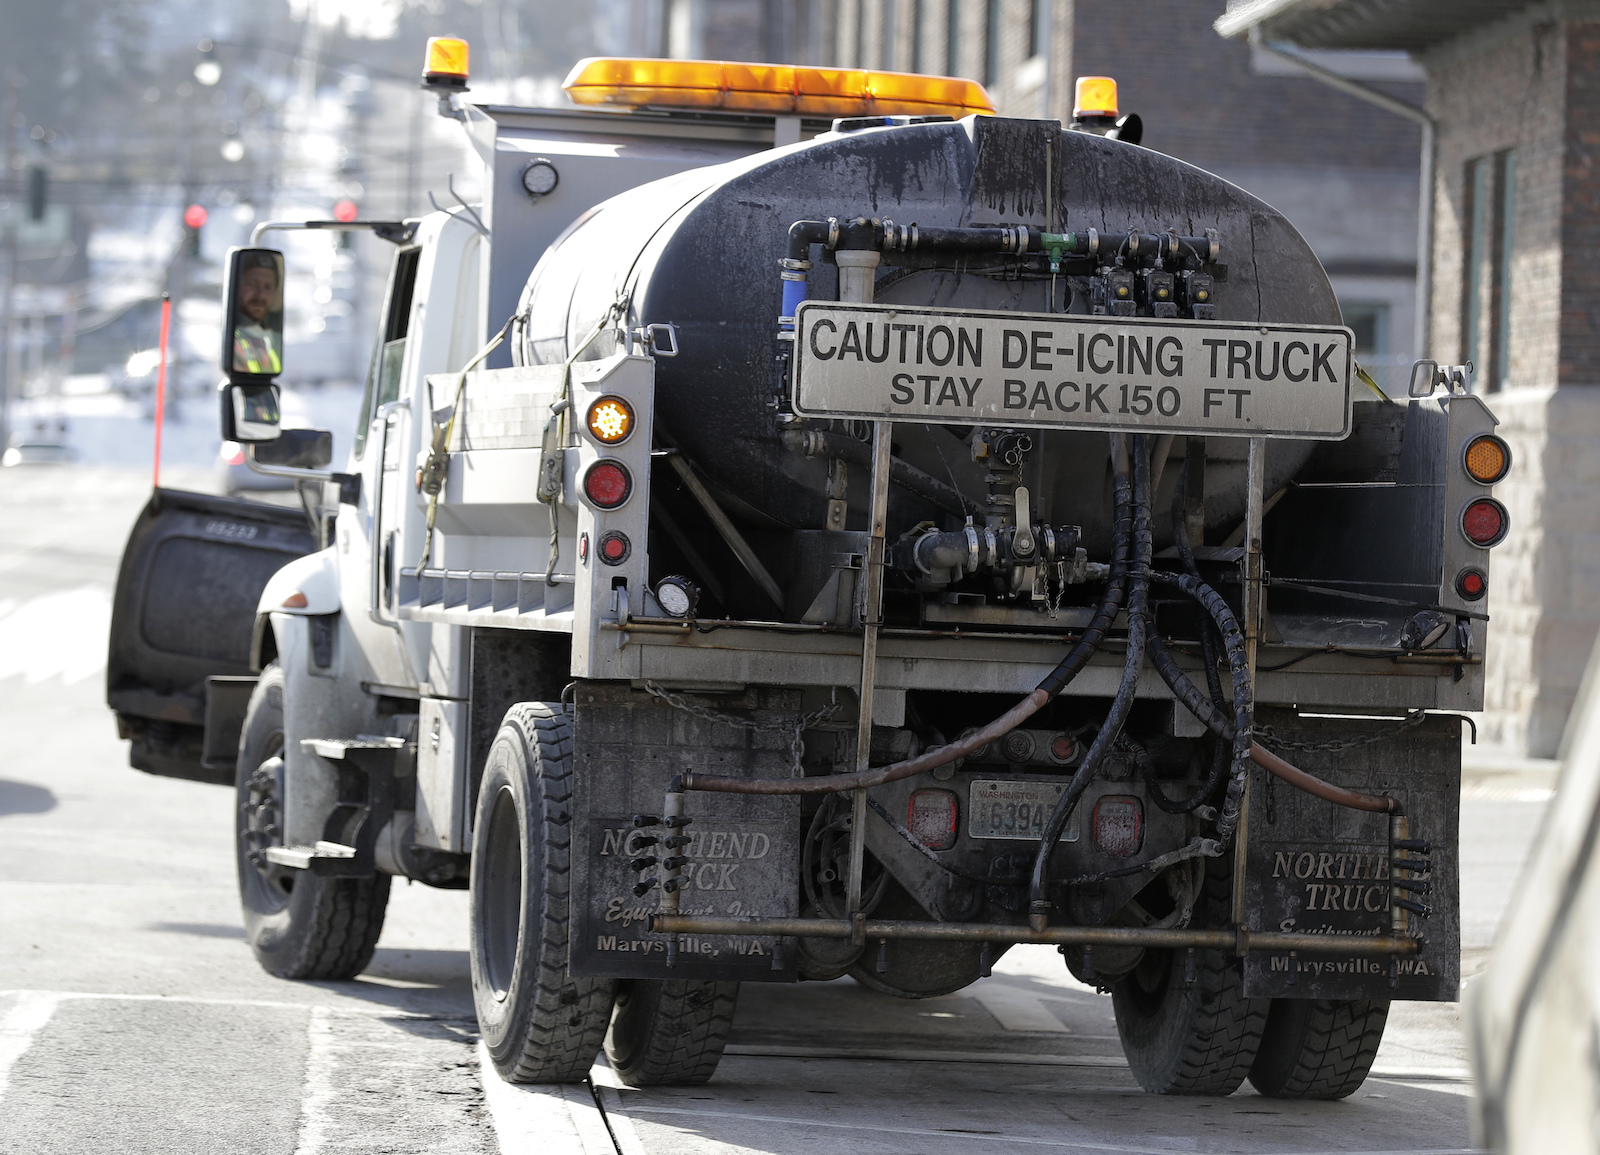 A truck with a sign that says "caution de-icing truck" drives down a street.